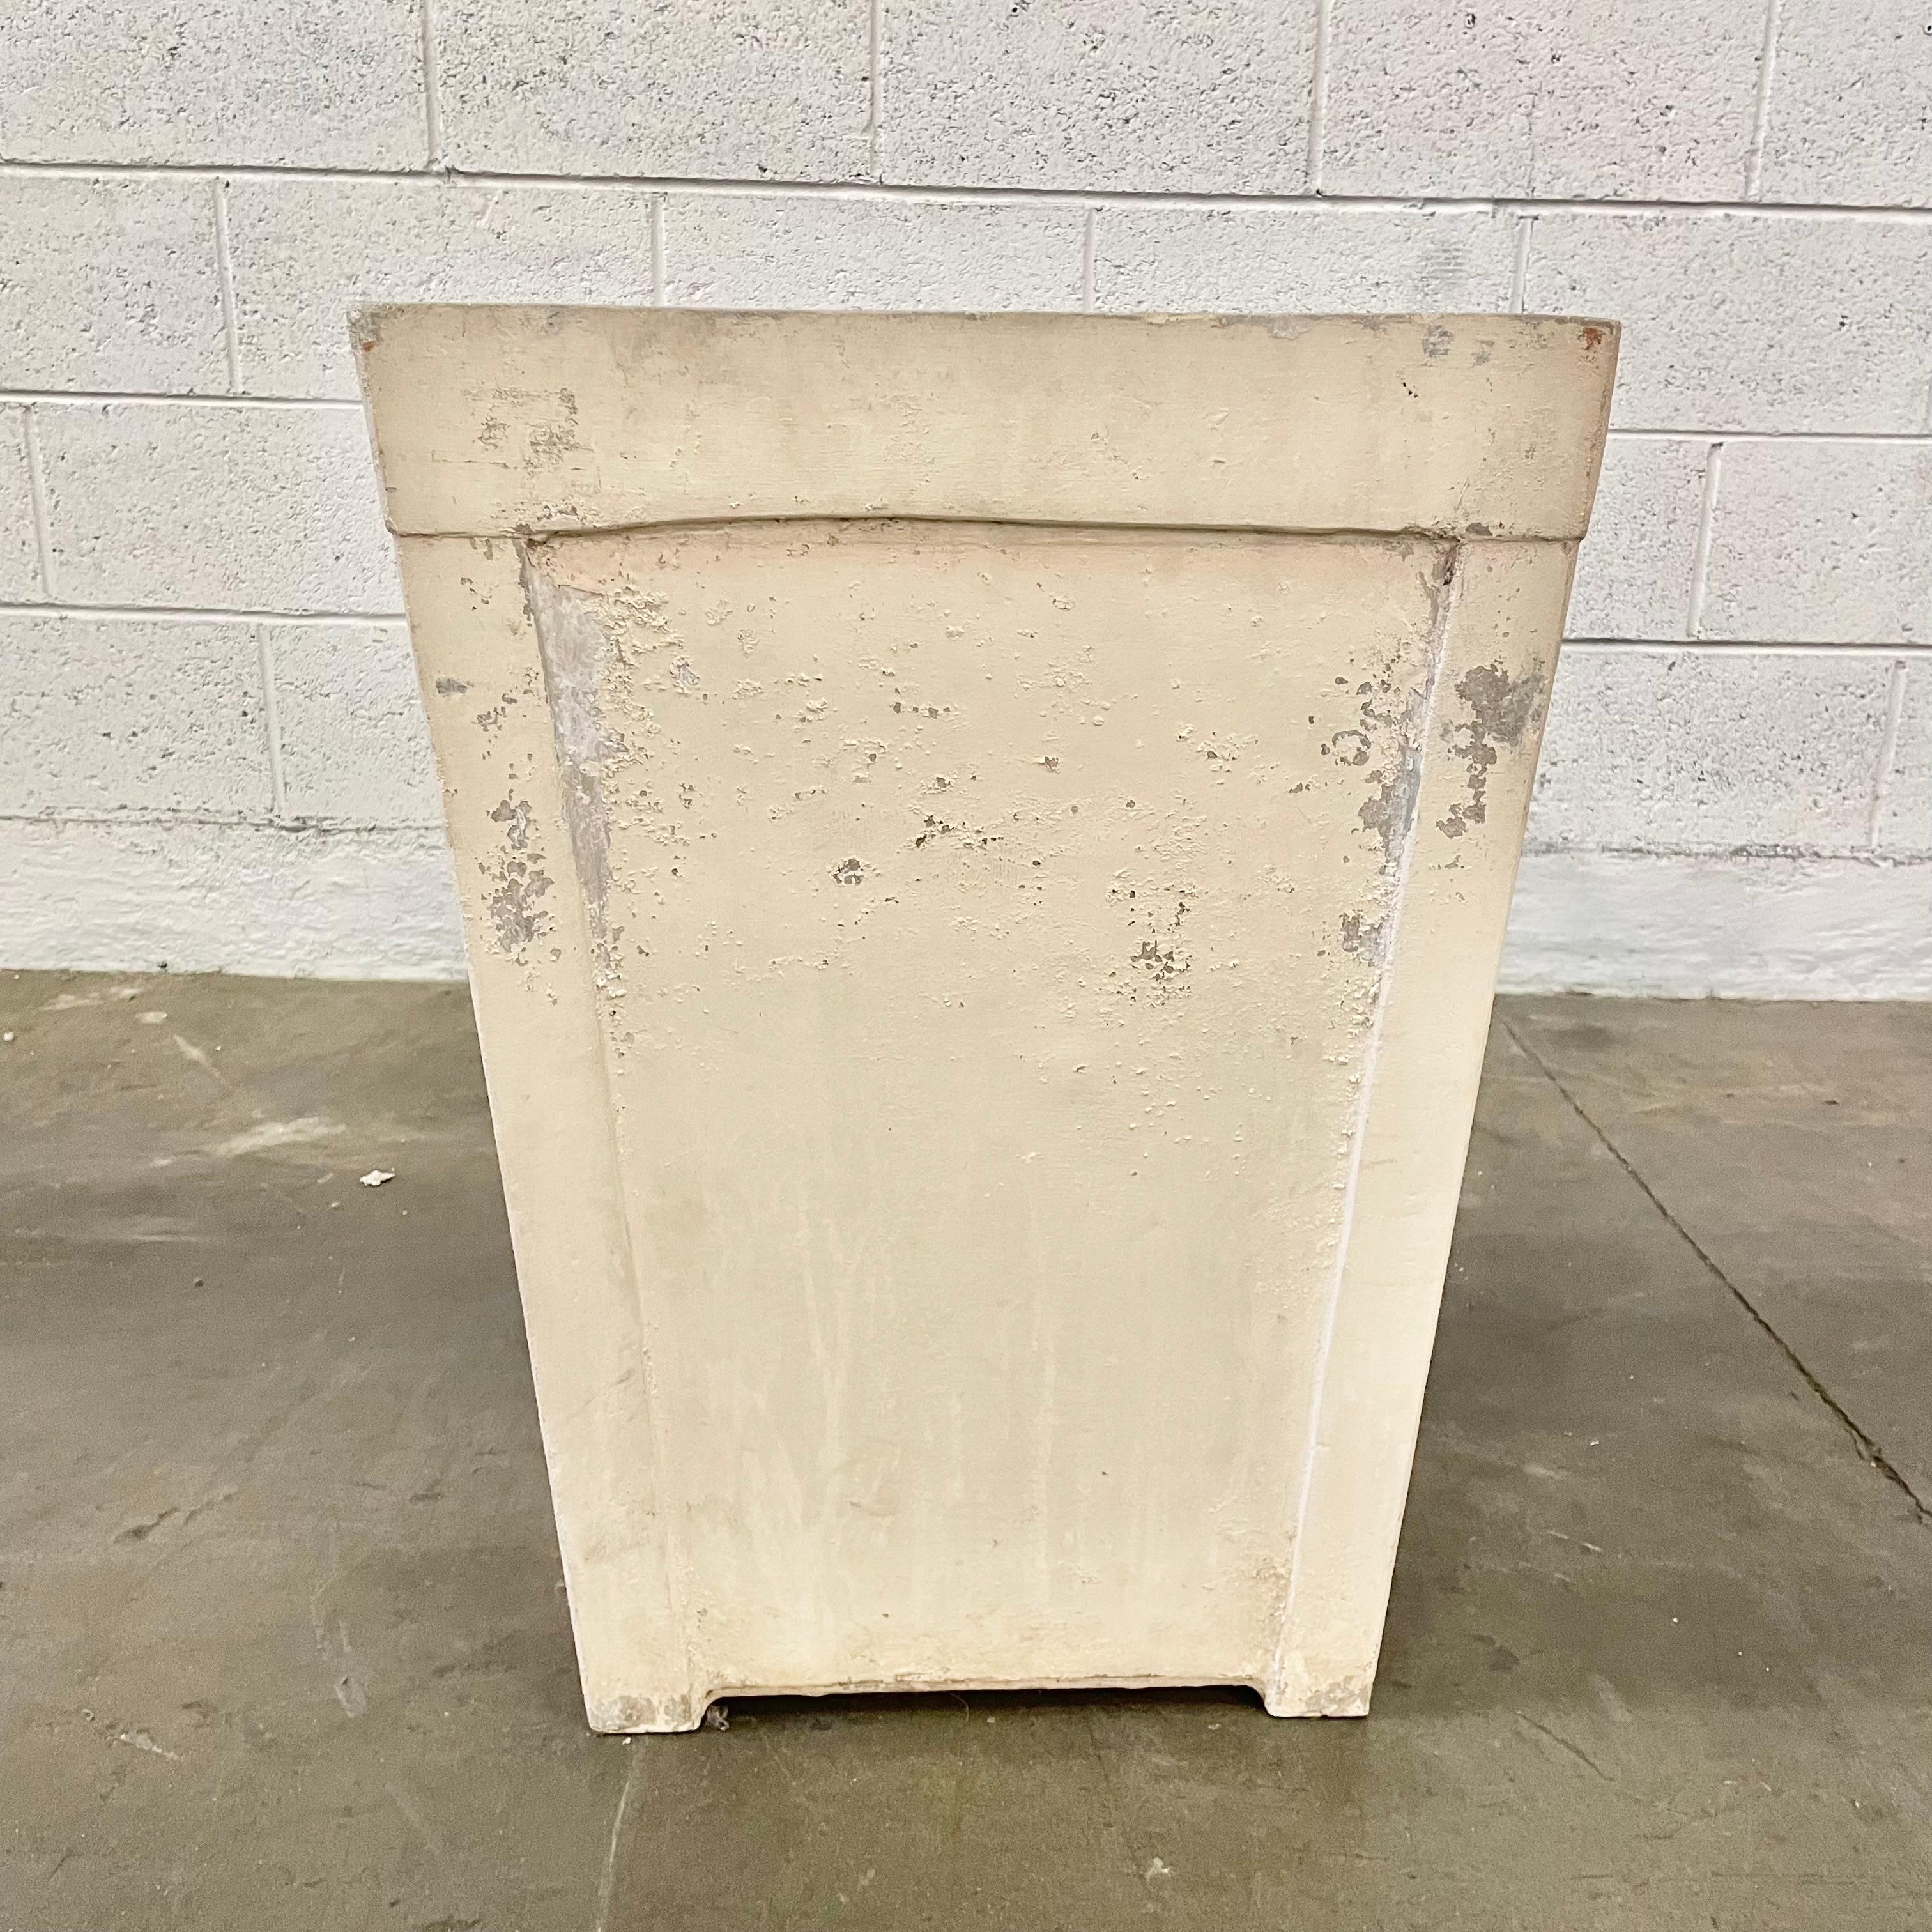 Massive concrete tree planter by Willy Guhl. Tall planter with 4 post feet raising the planter slightly off the ground. Good vintage condition. Perfect for a large plant or tree, indoors or out. Only one available.



